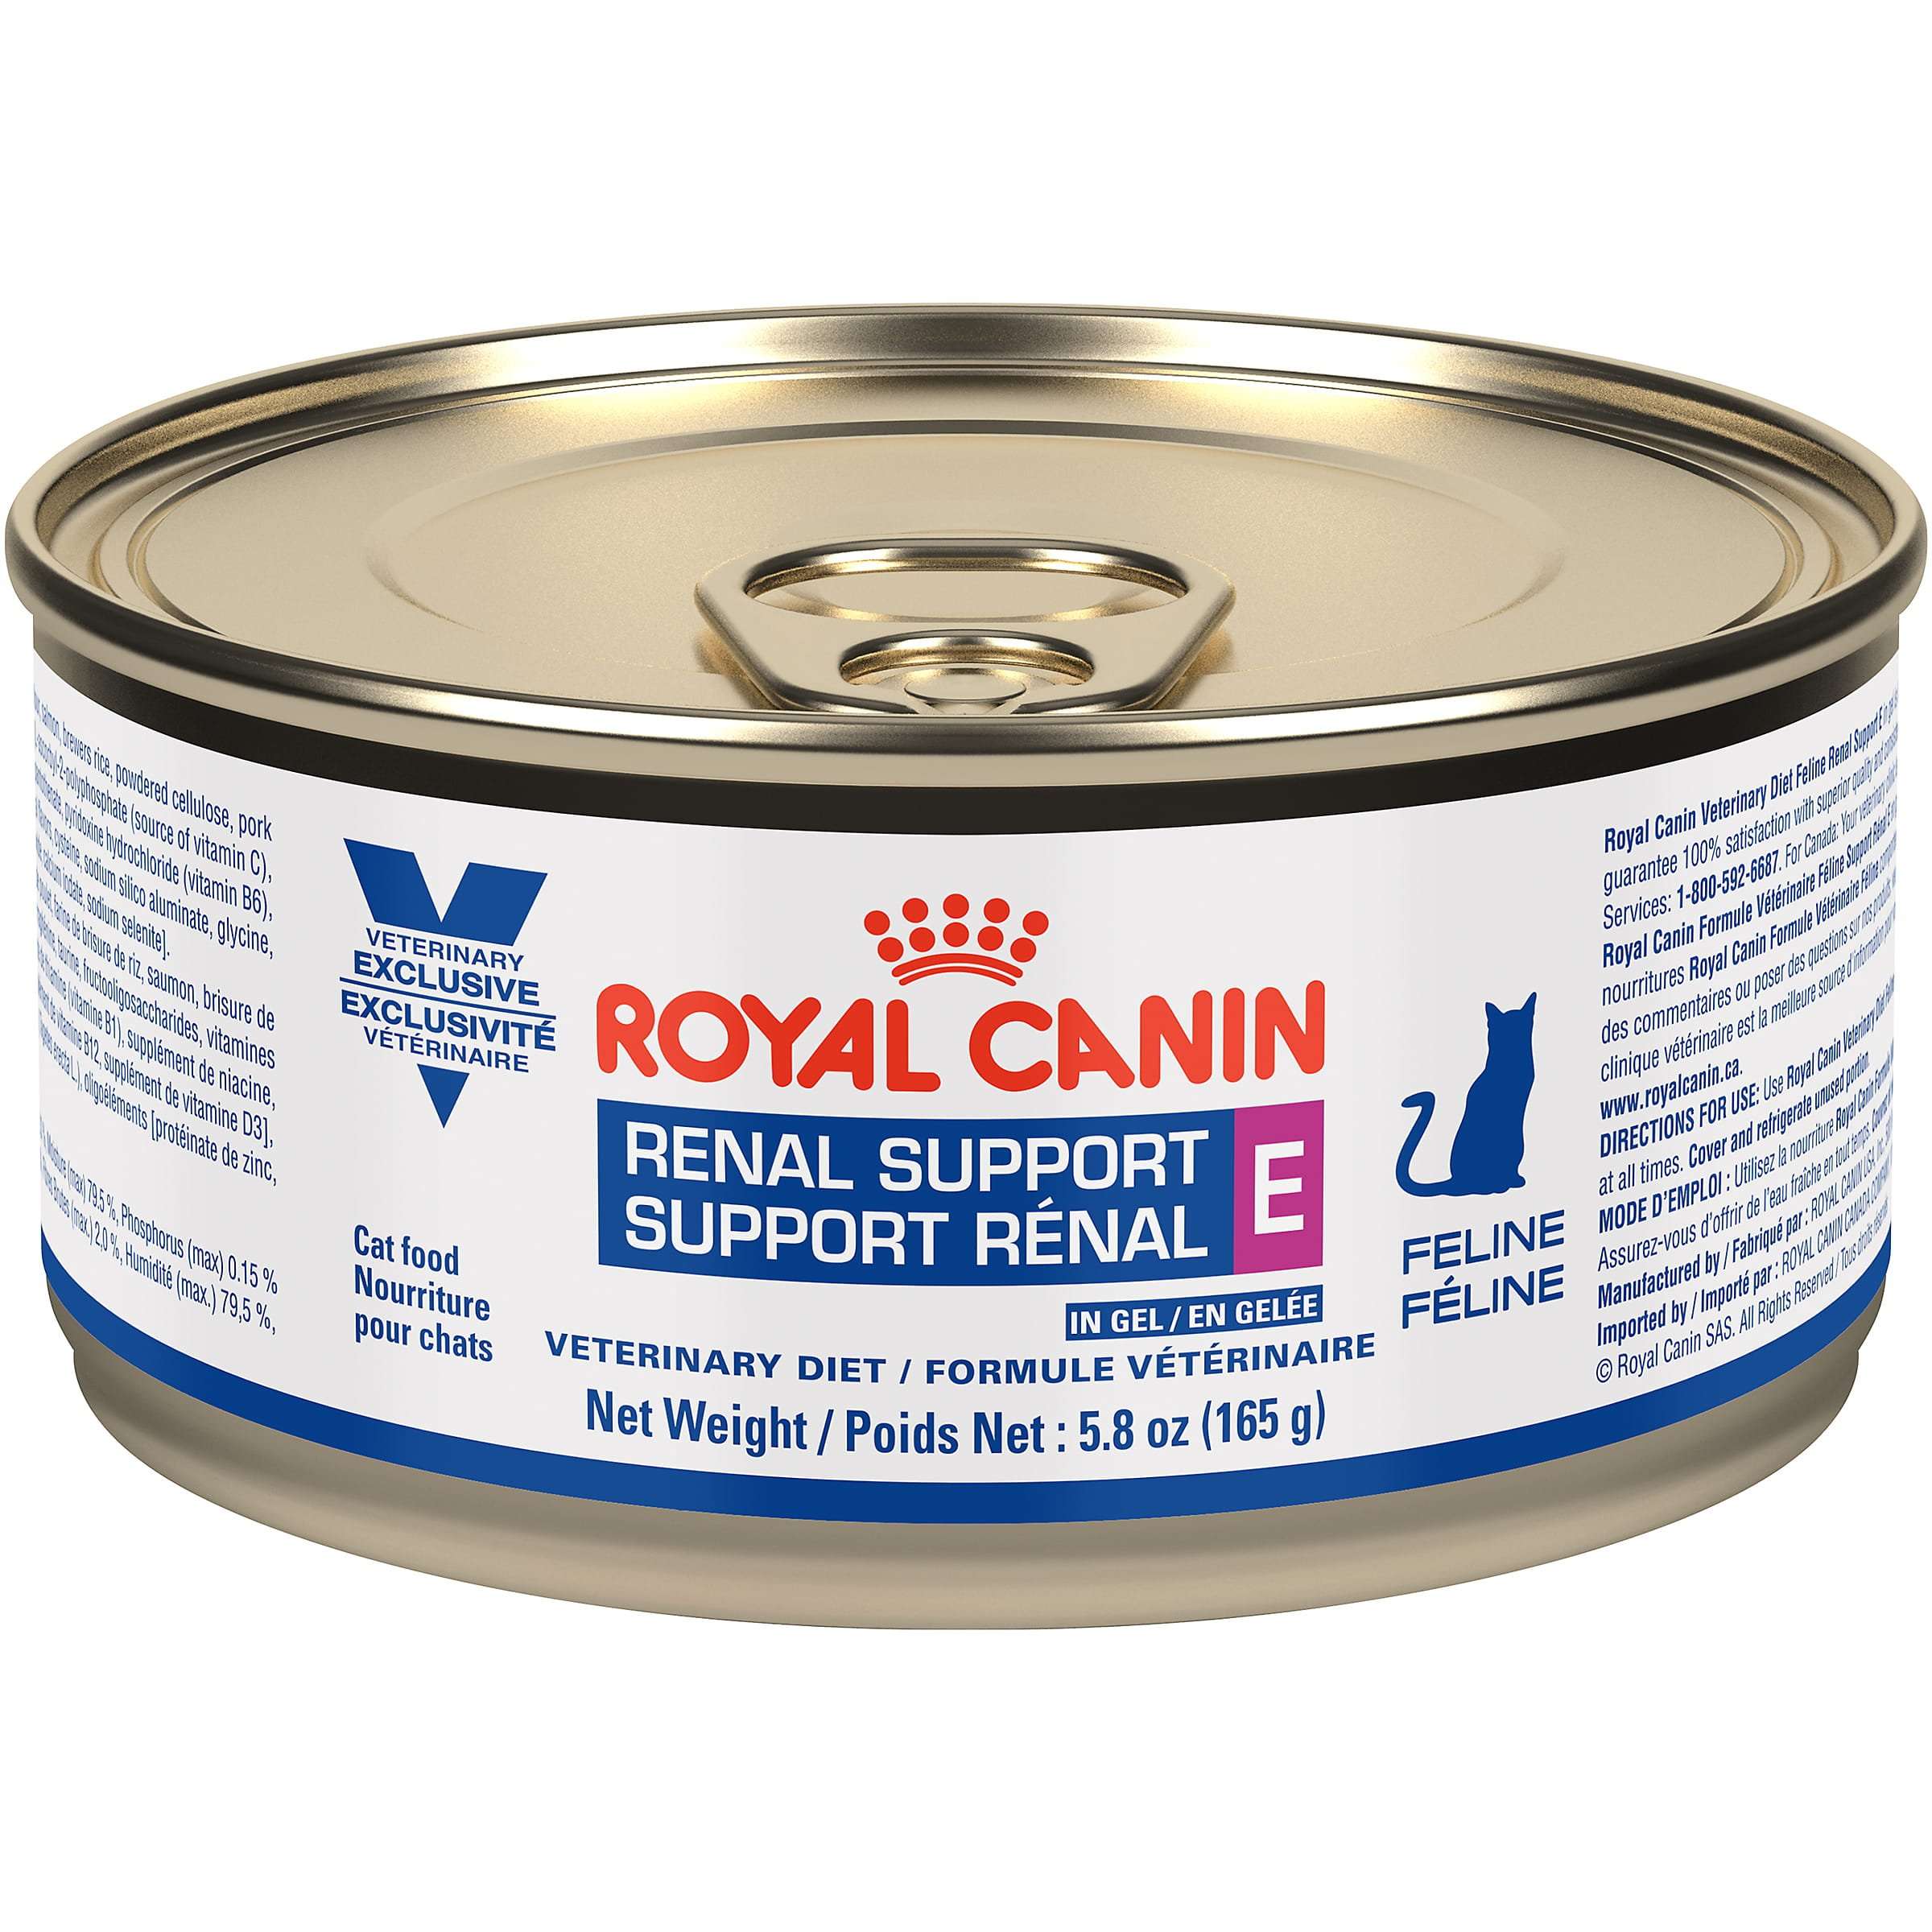 Feline Renal Support E Canned Cat Food